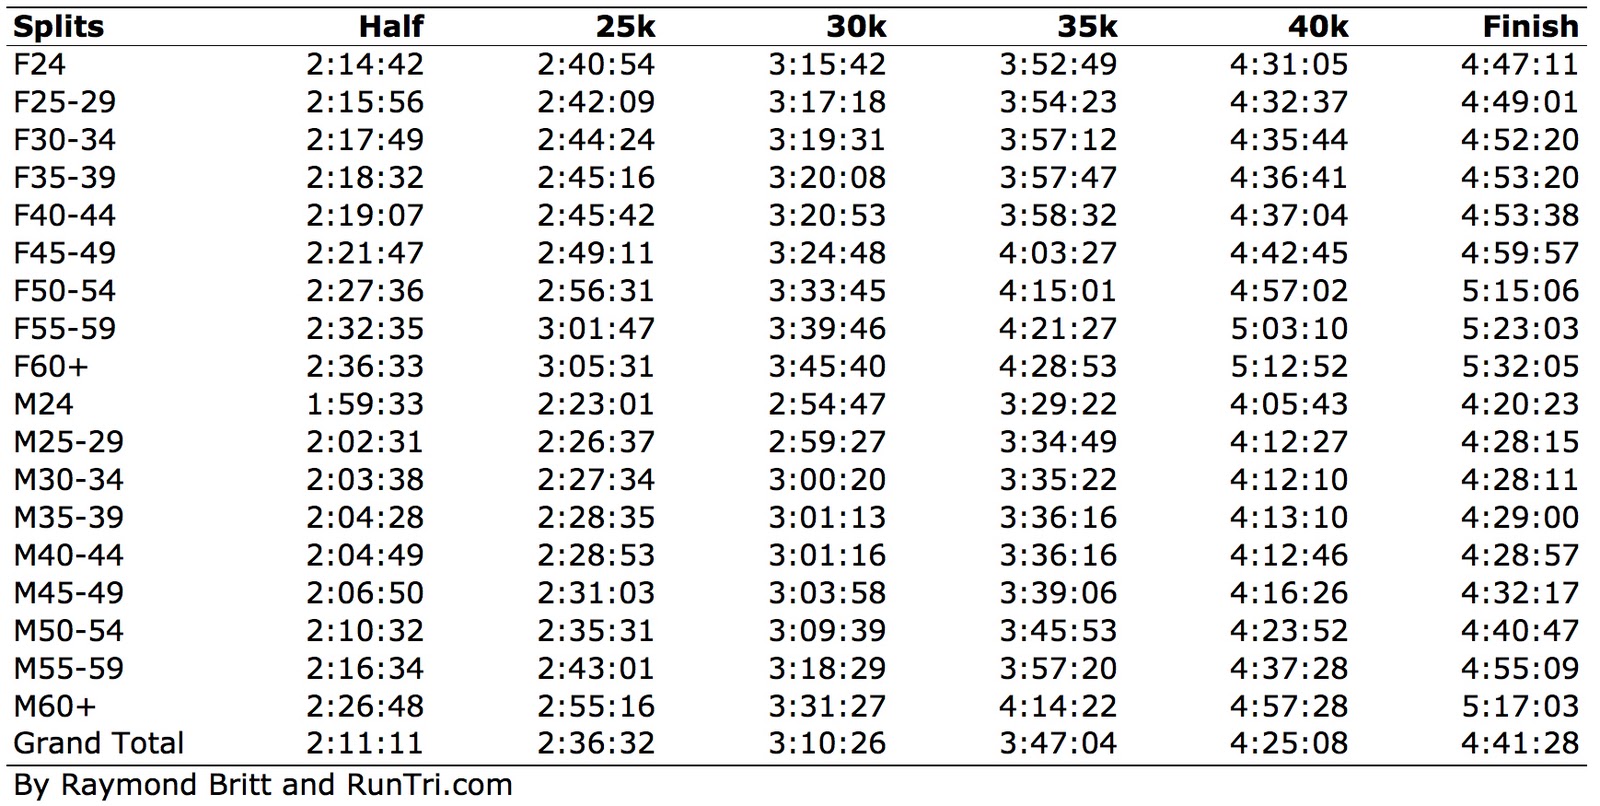 Mile Run Time Chart By Age